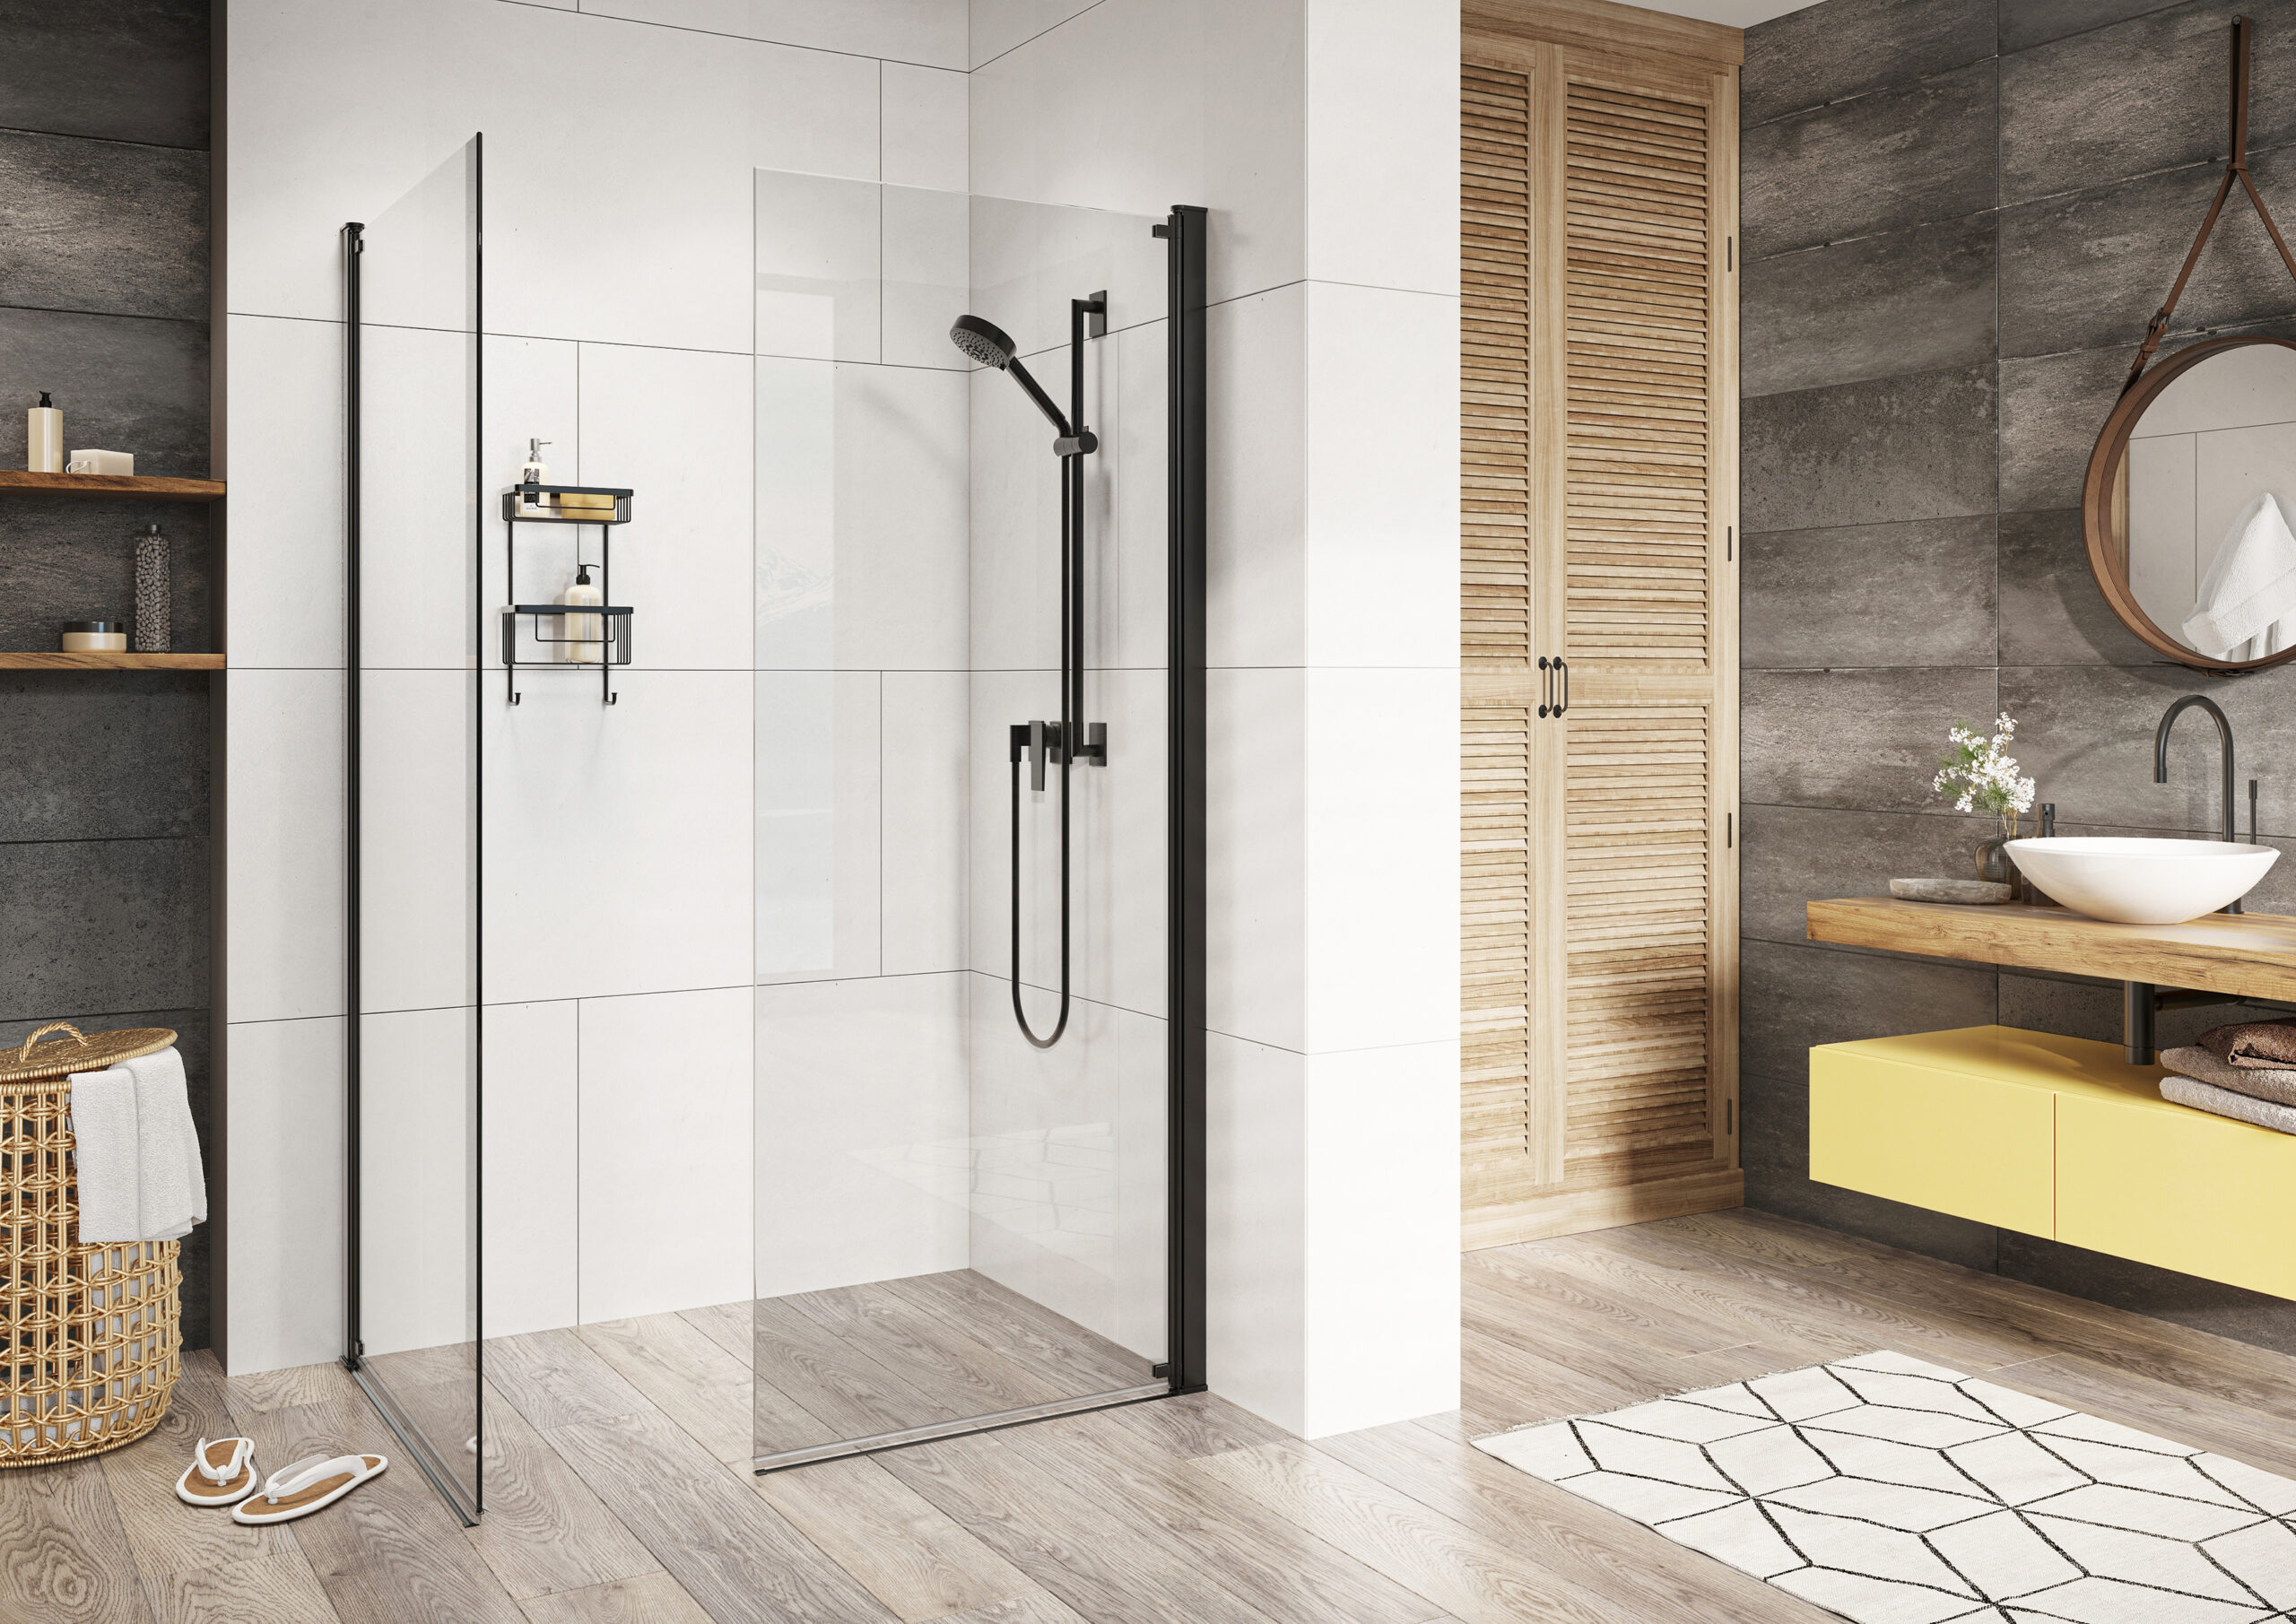 Roman introduces the Innov8 Pivoting Wetroom Panel